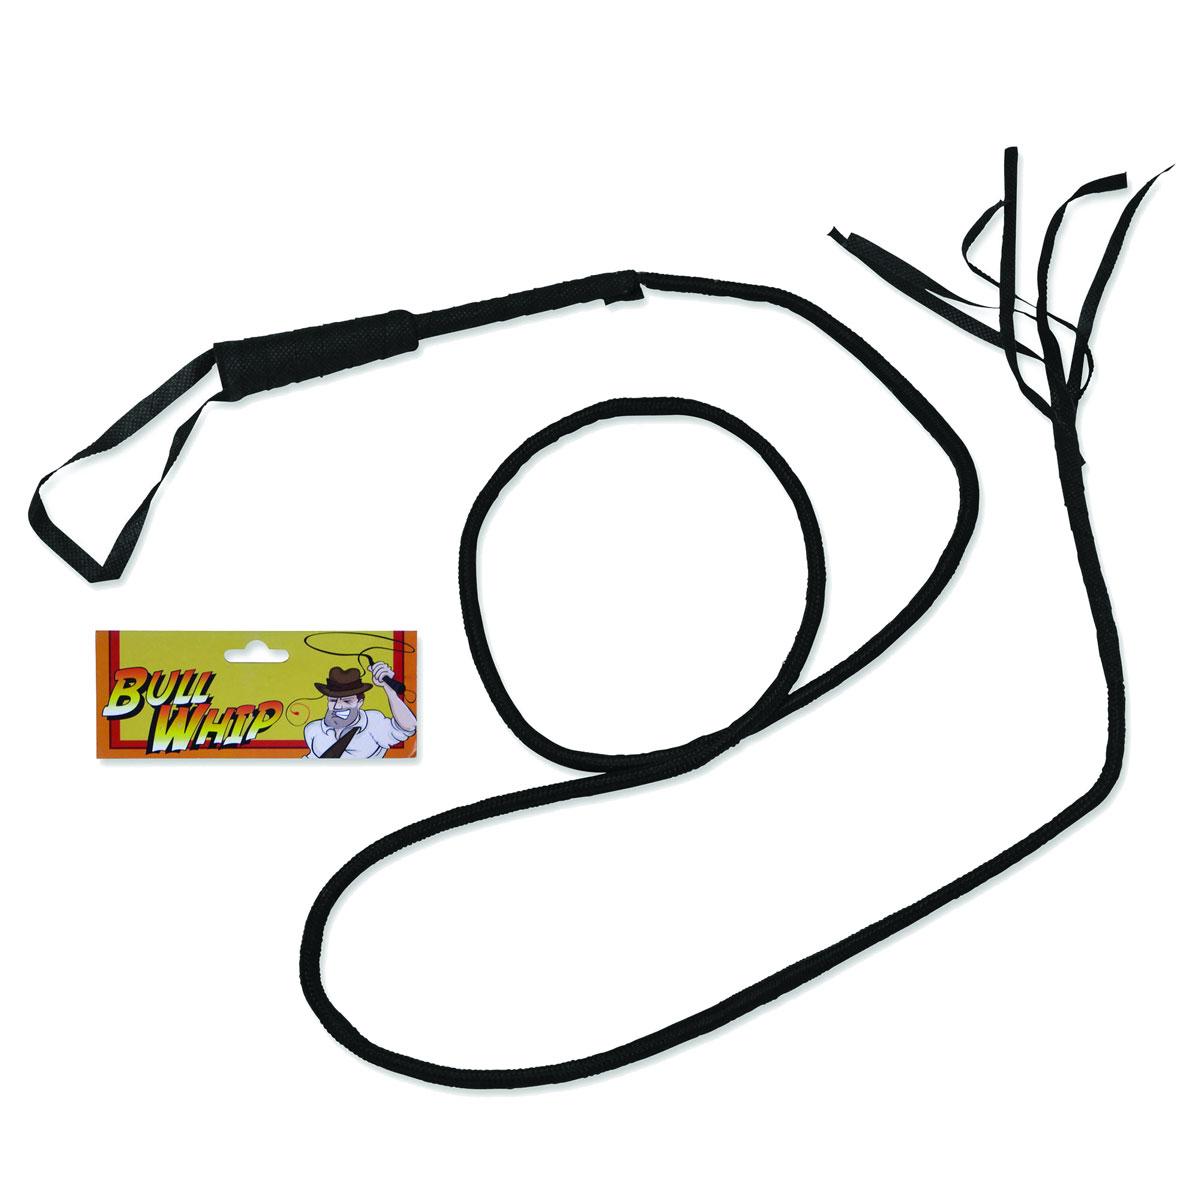 Circus Bull Whip or Explorer's Whip by Bristol Novelties BA030 available here at Karnival Costumes online party shop